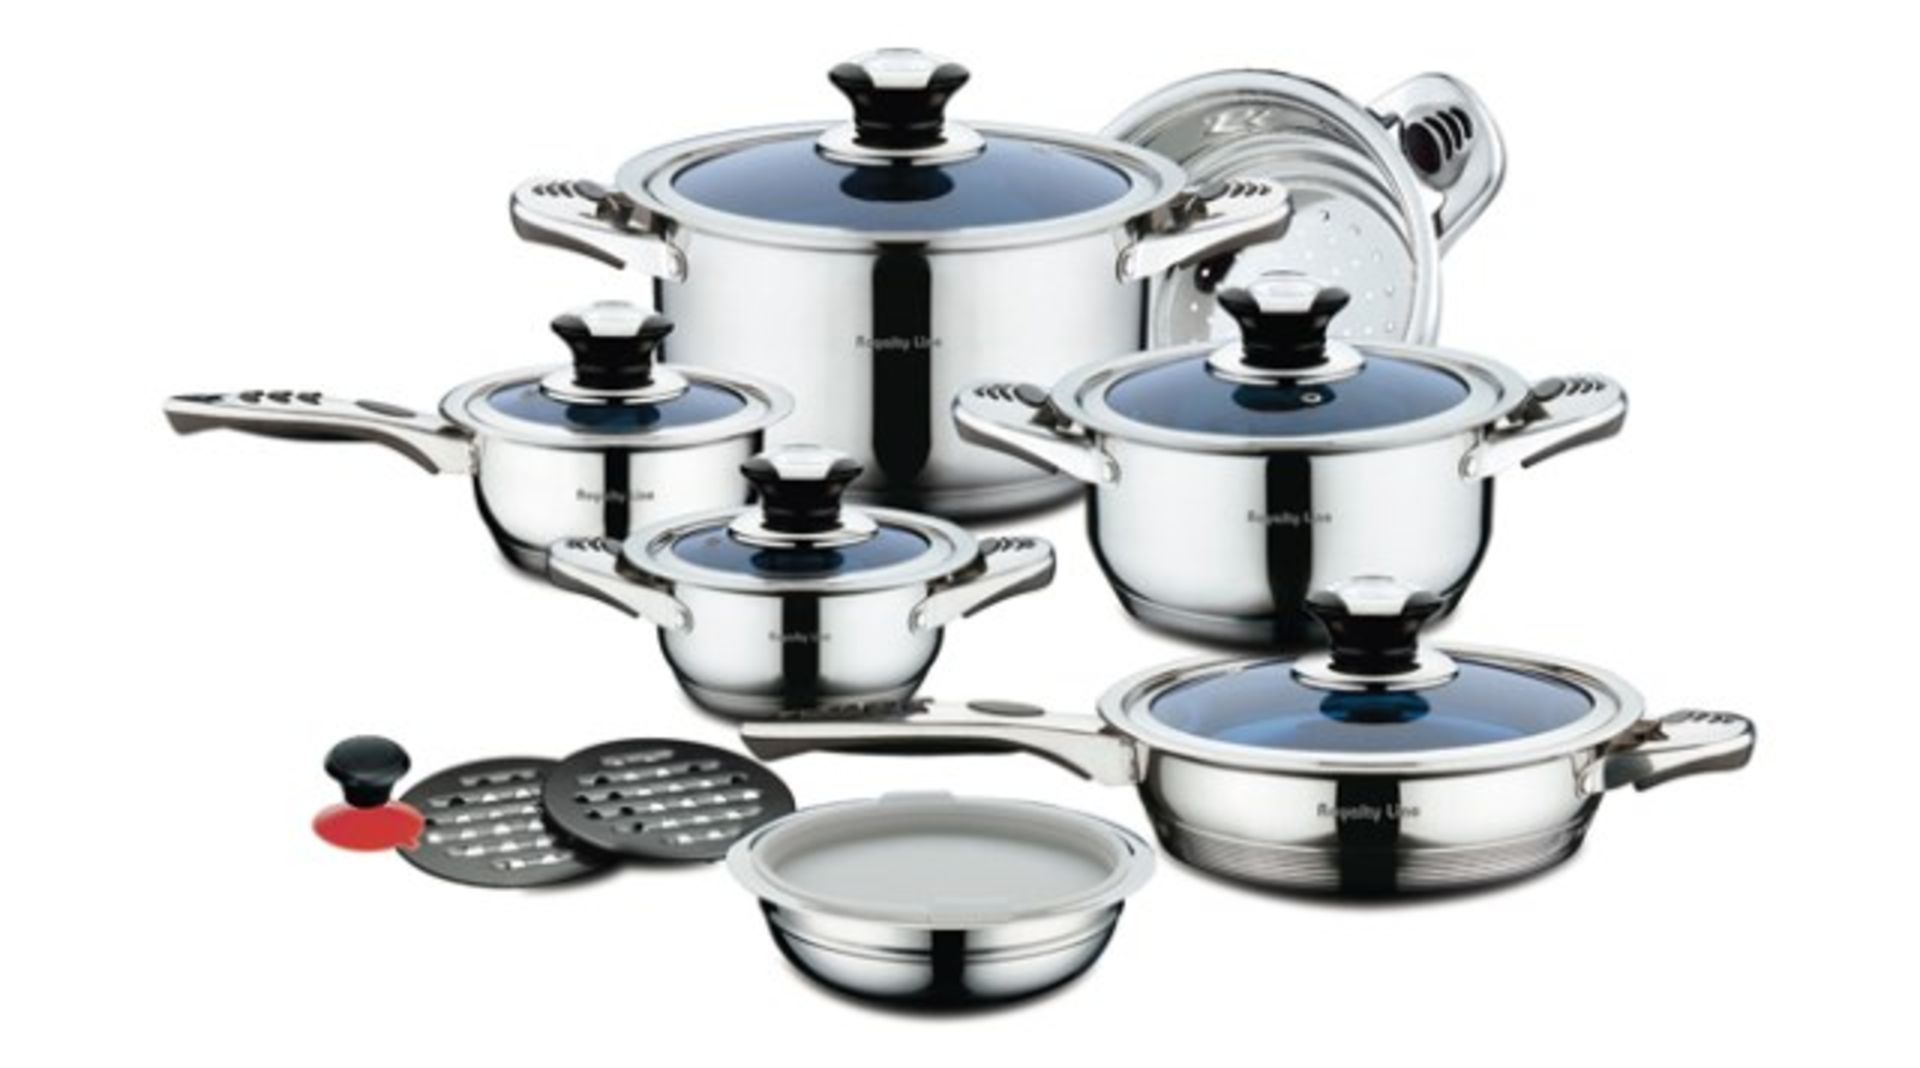 V *TRADE QTY* Brand New 16 pce Stainless Steel Cookware Set Suitable For All Types Of Stoves Inc 3